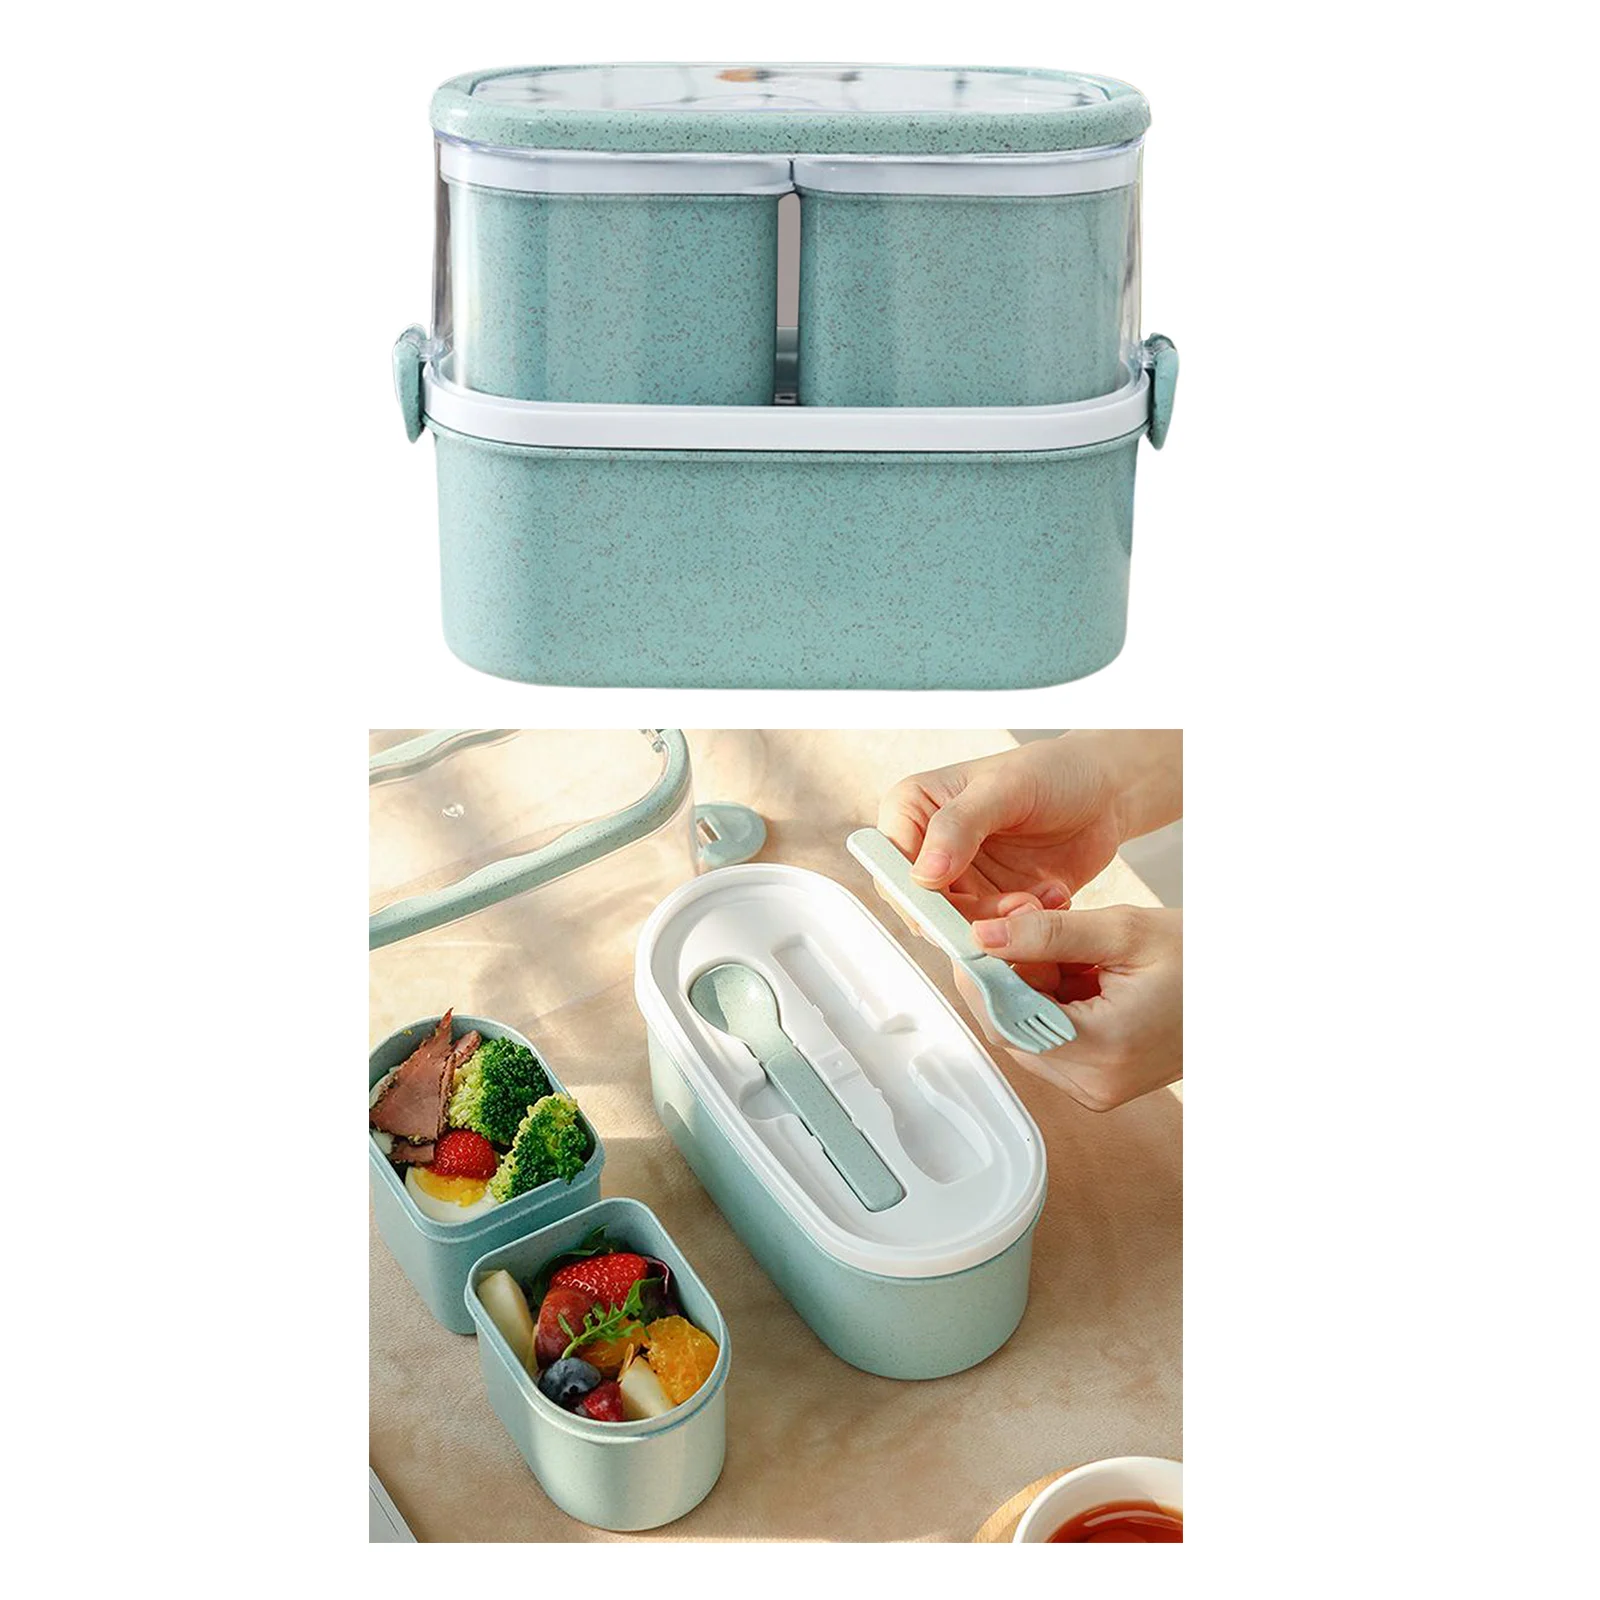 

Reusable Lunch Box Sandwich Salad Fruit Food Box Storage Container with Spoon Fork